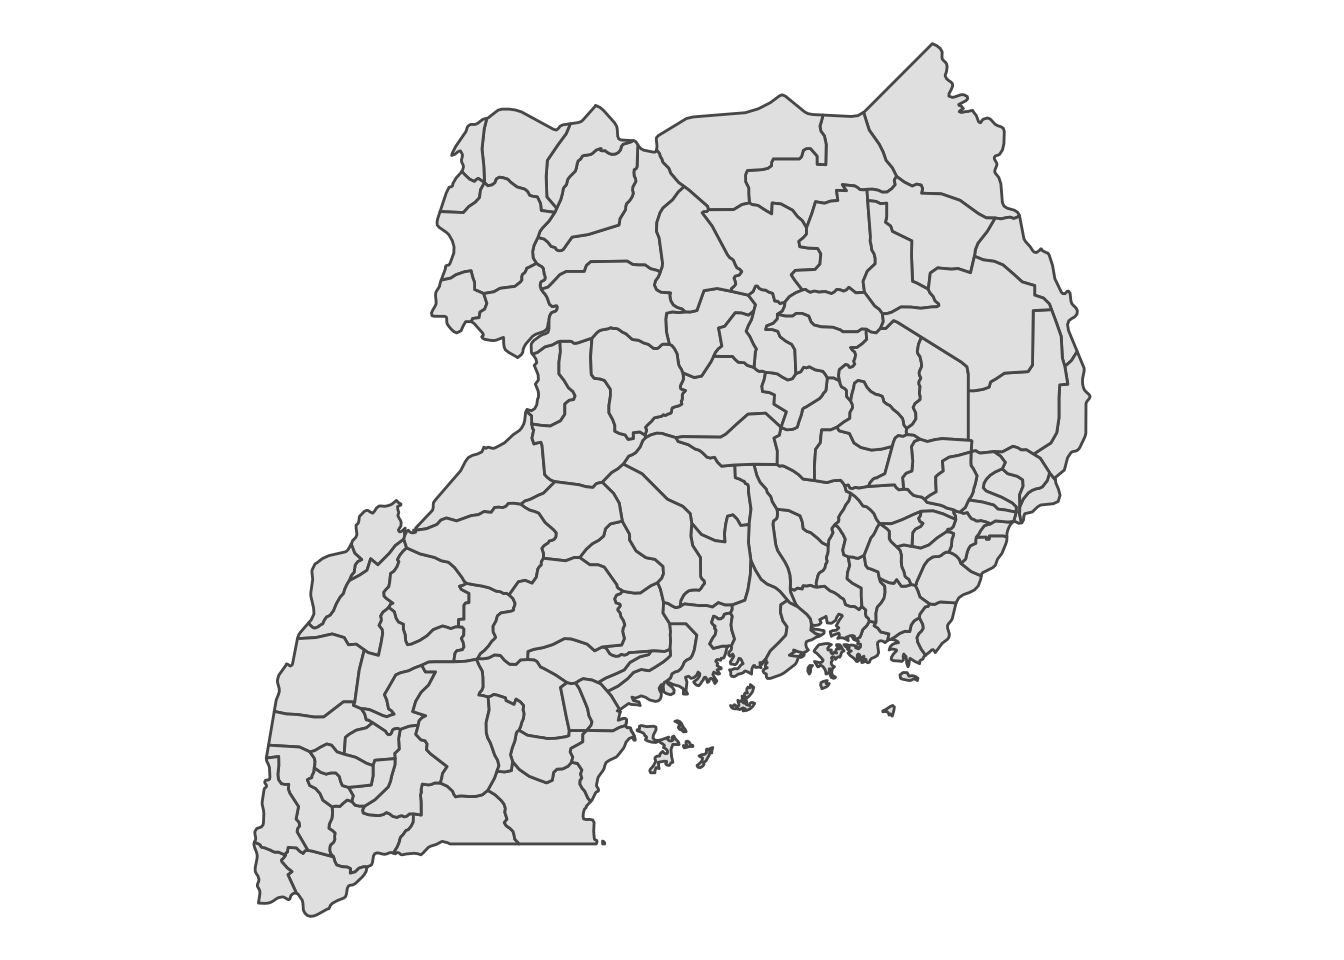 Uganda broken up into districts by grey borders. Each district is the same light grey shade.